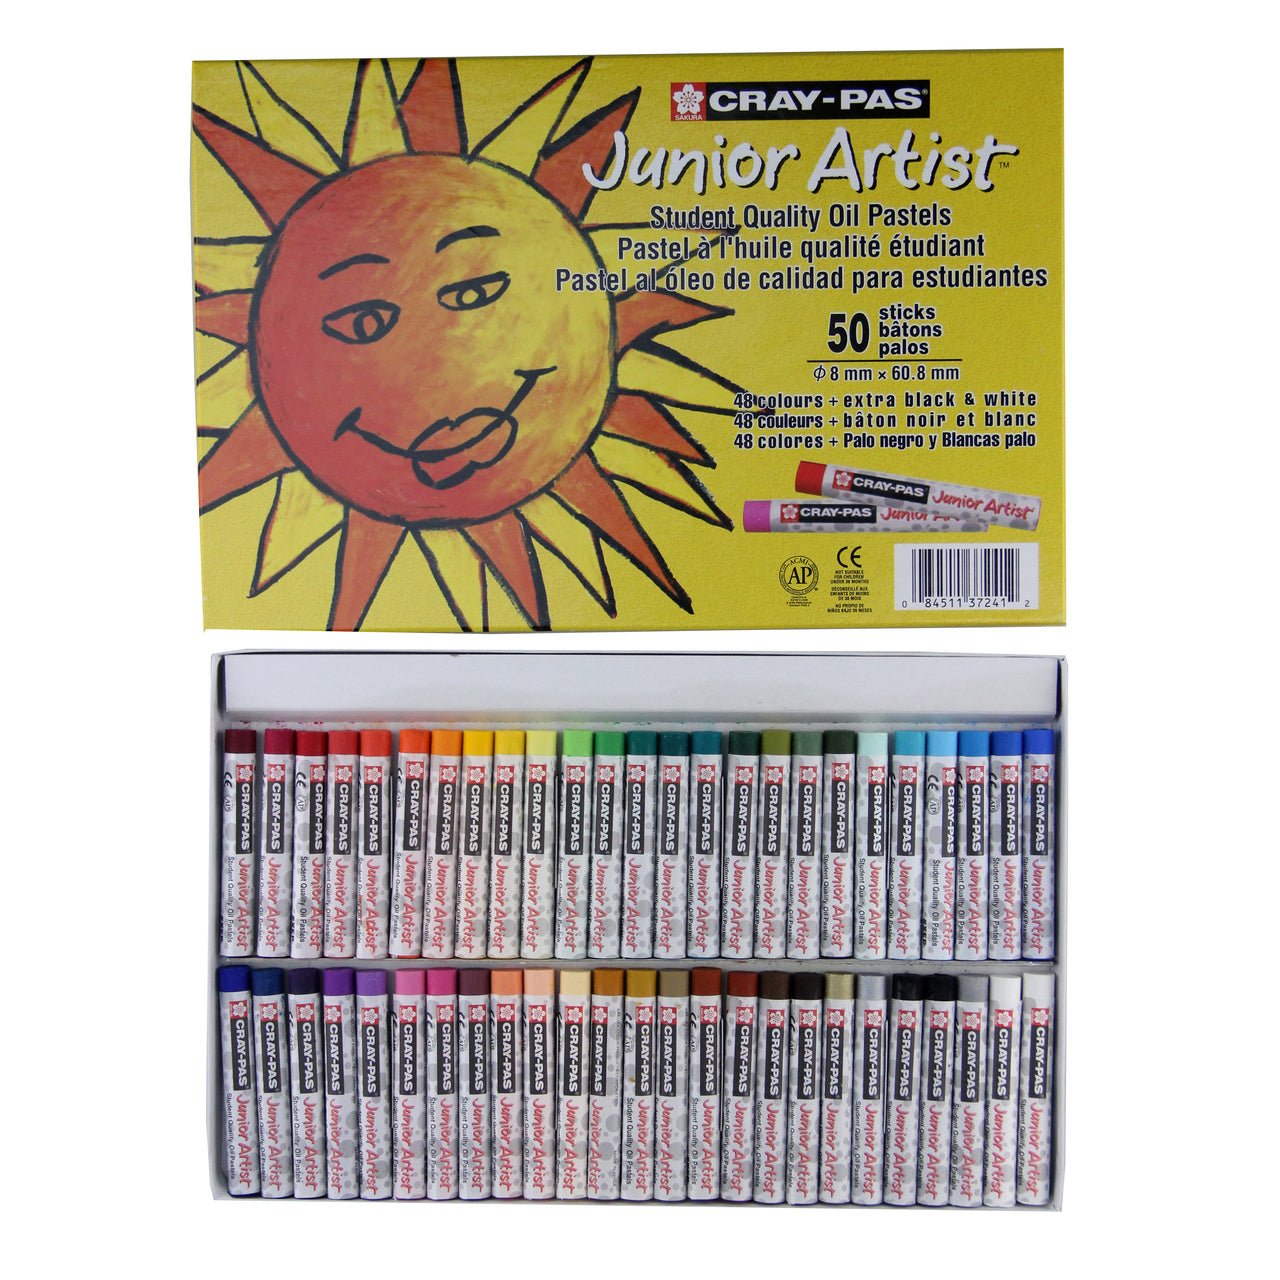 MAT WATER COLORS PLASTIC TUBE｜SAKURA COLOR PRODUCTS CORP.